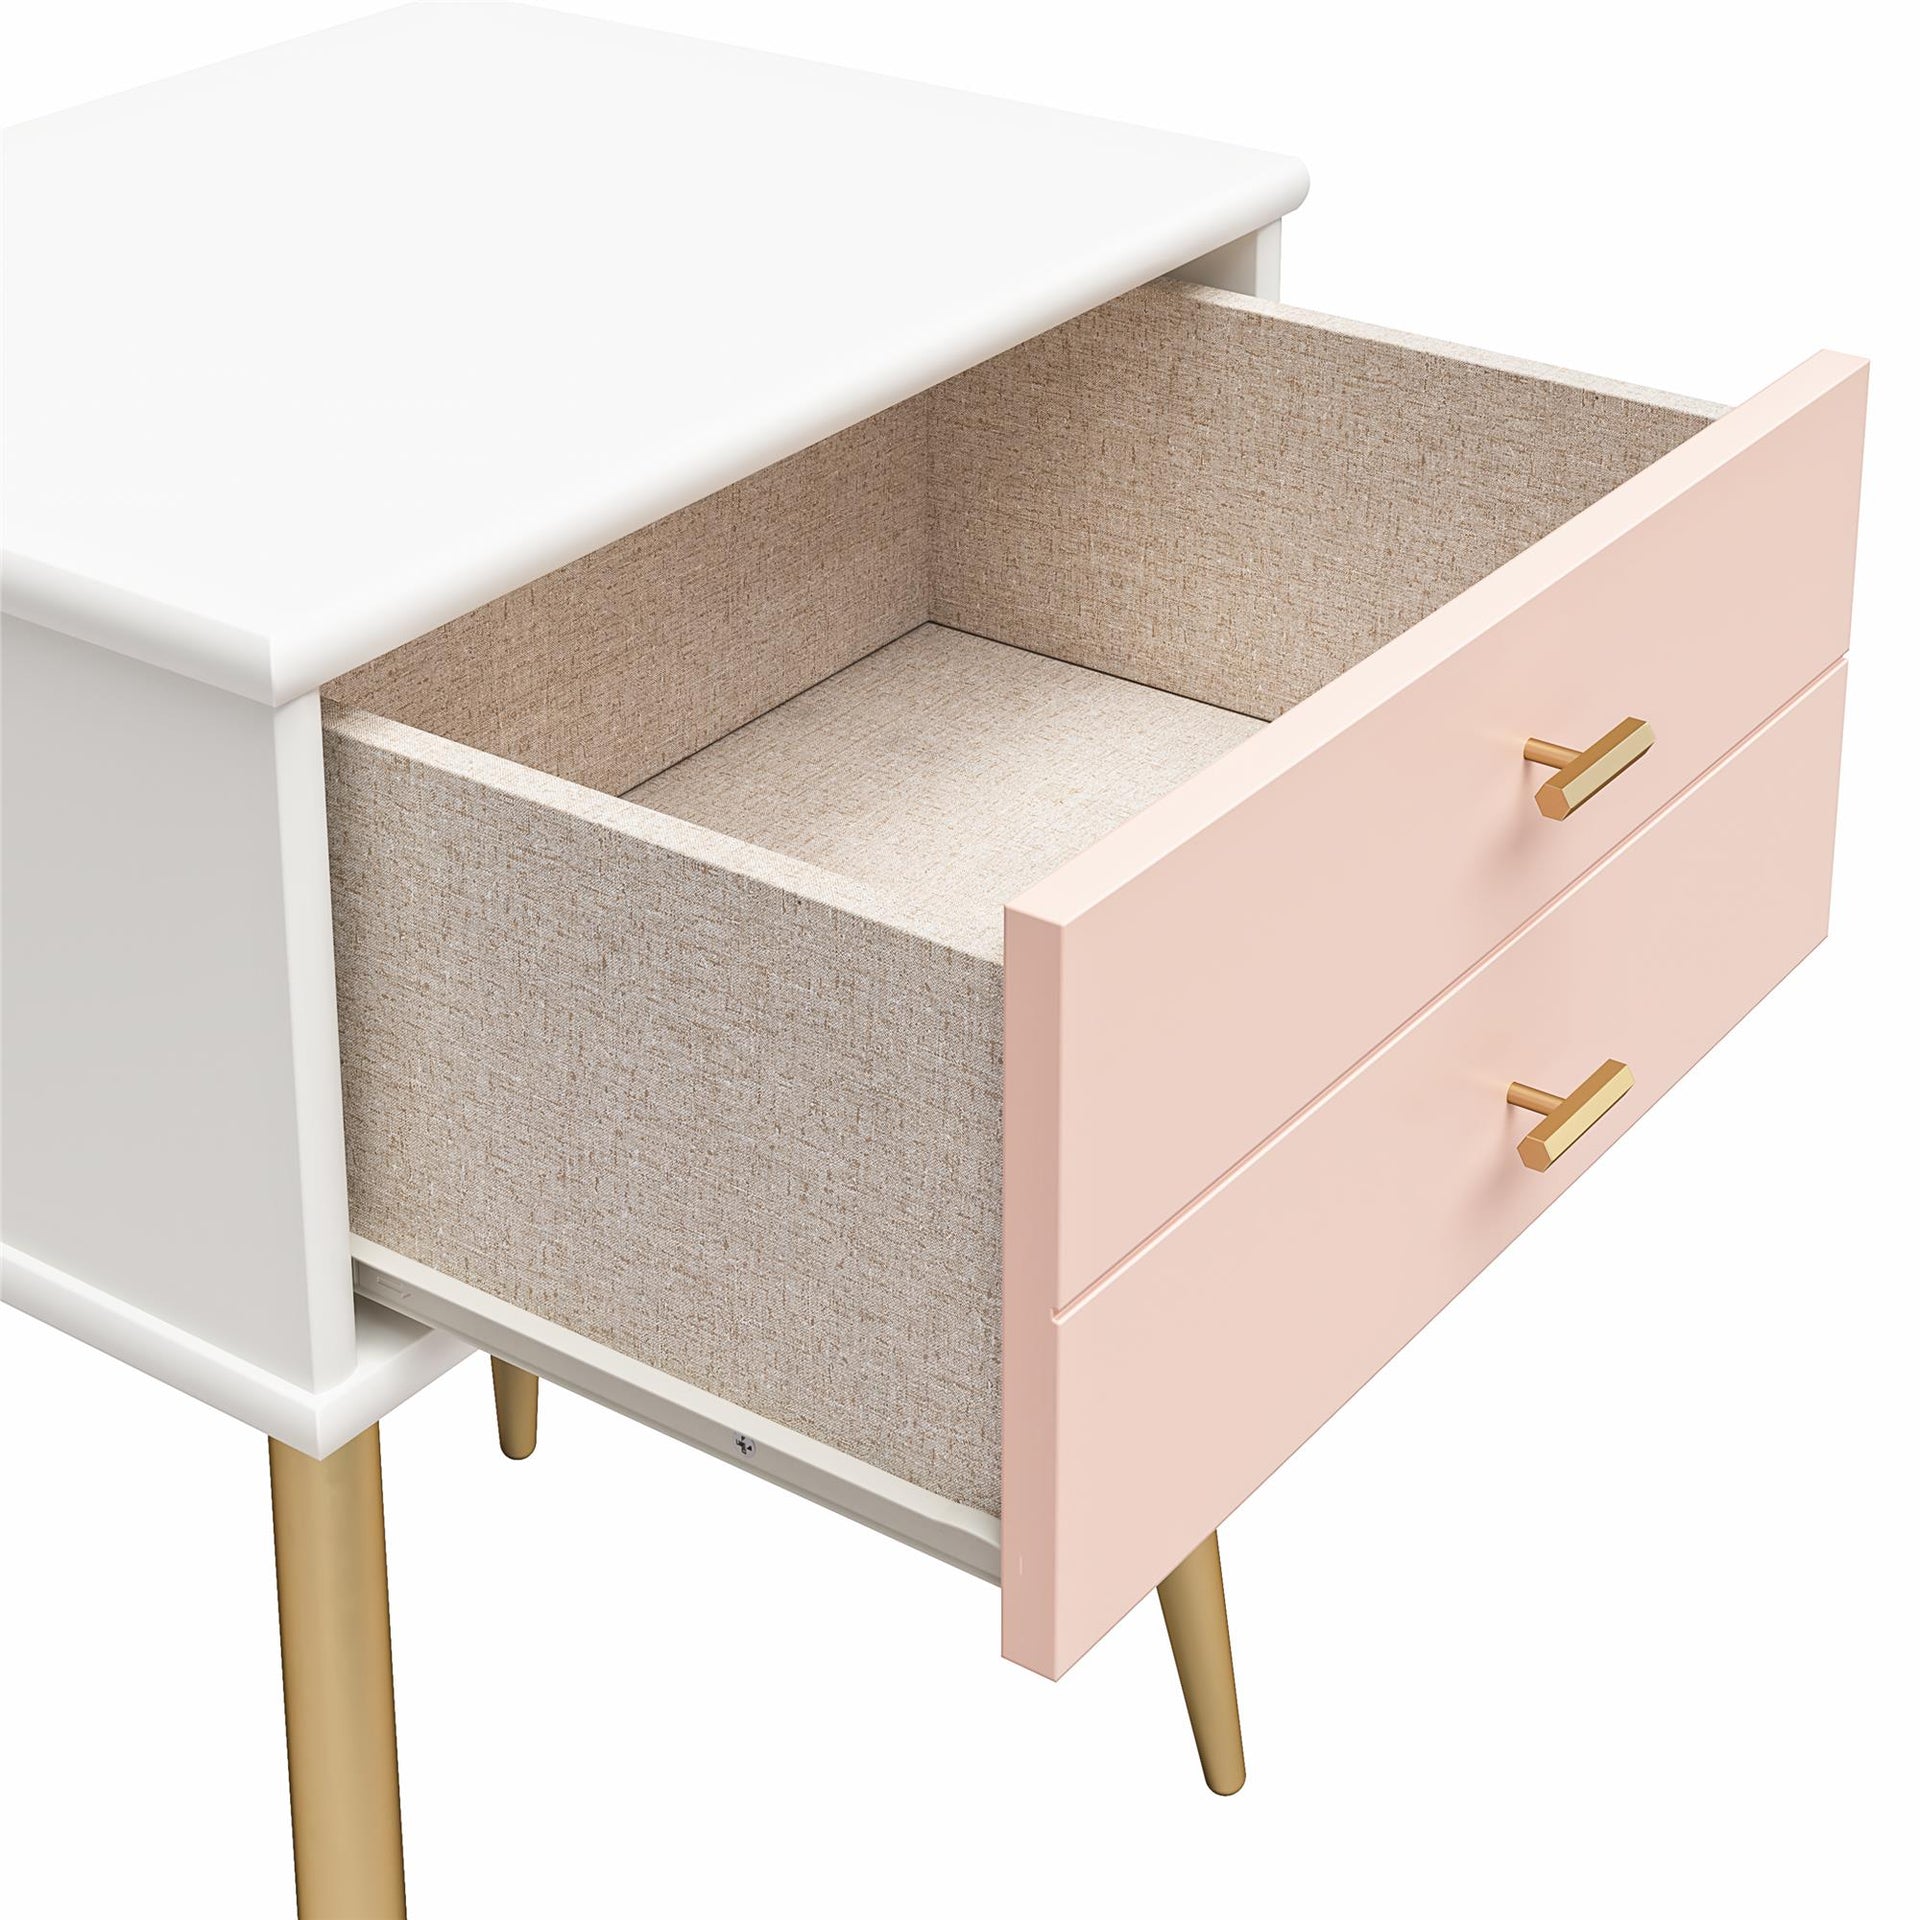 Valentina 1 Drawer Nightstand, White and Pink - Pale Pink